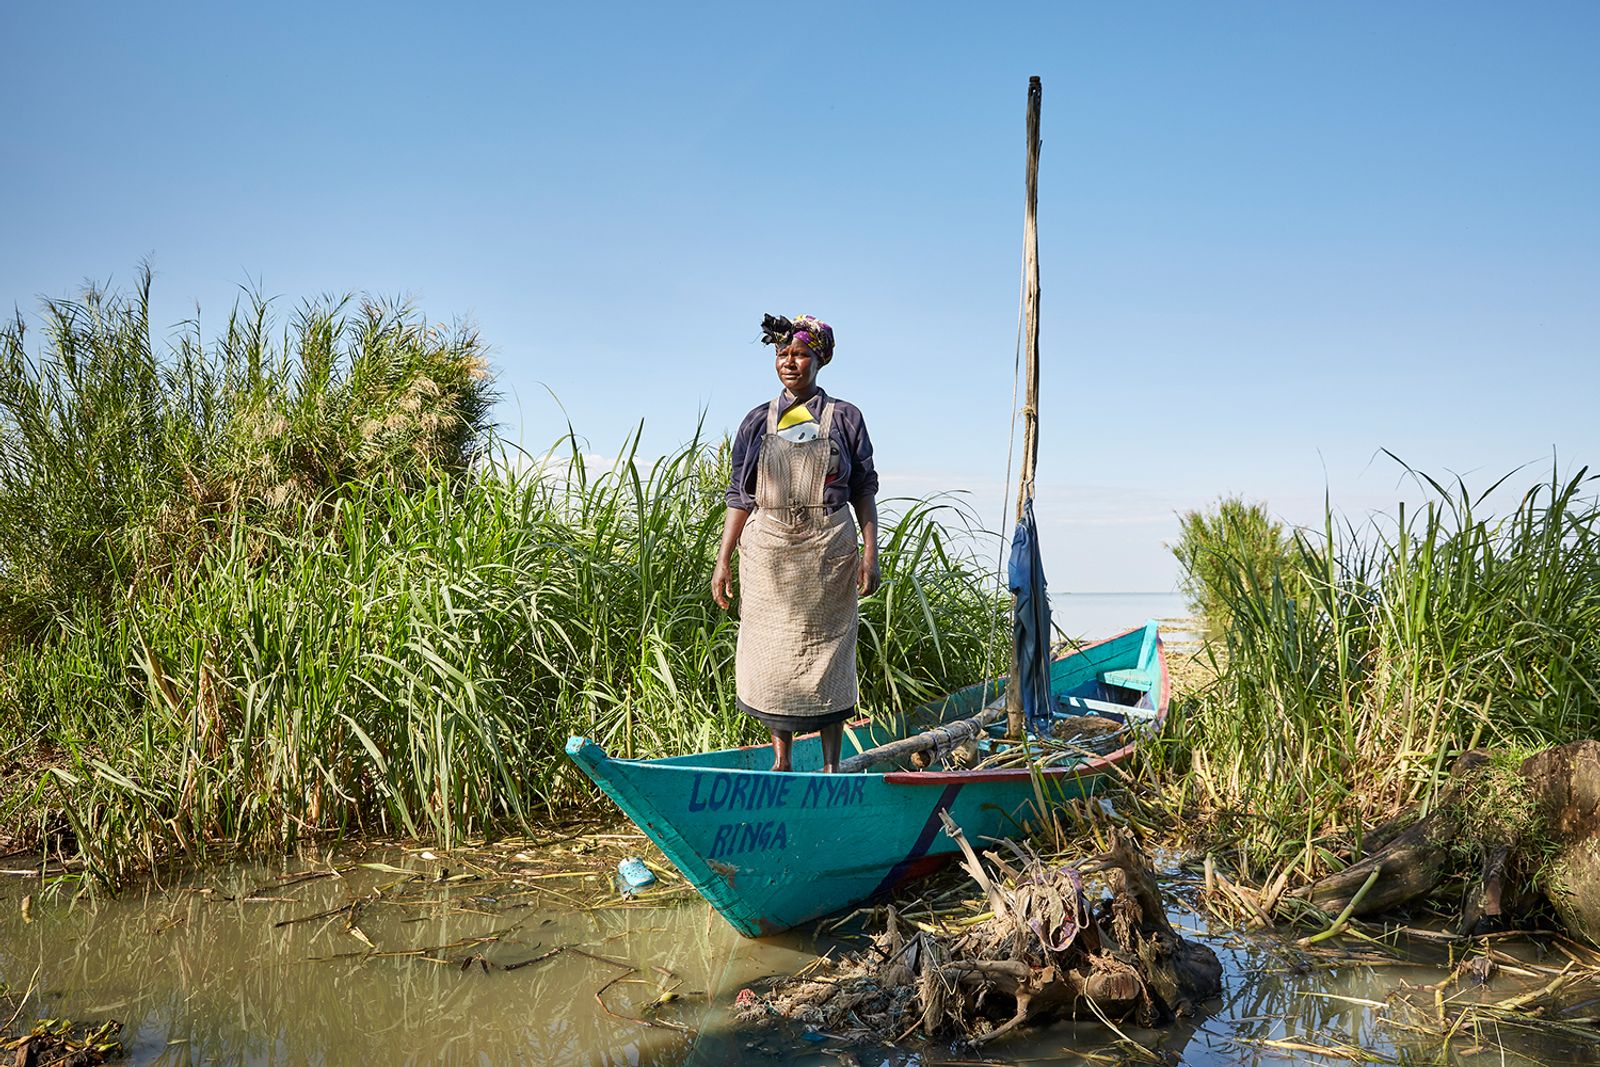 © Julia Gunther - Lorine Abuto has one of the few No Sex For Fish boats that are still functioning in Nduru Beach, Kenya, 2019.